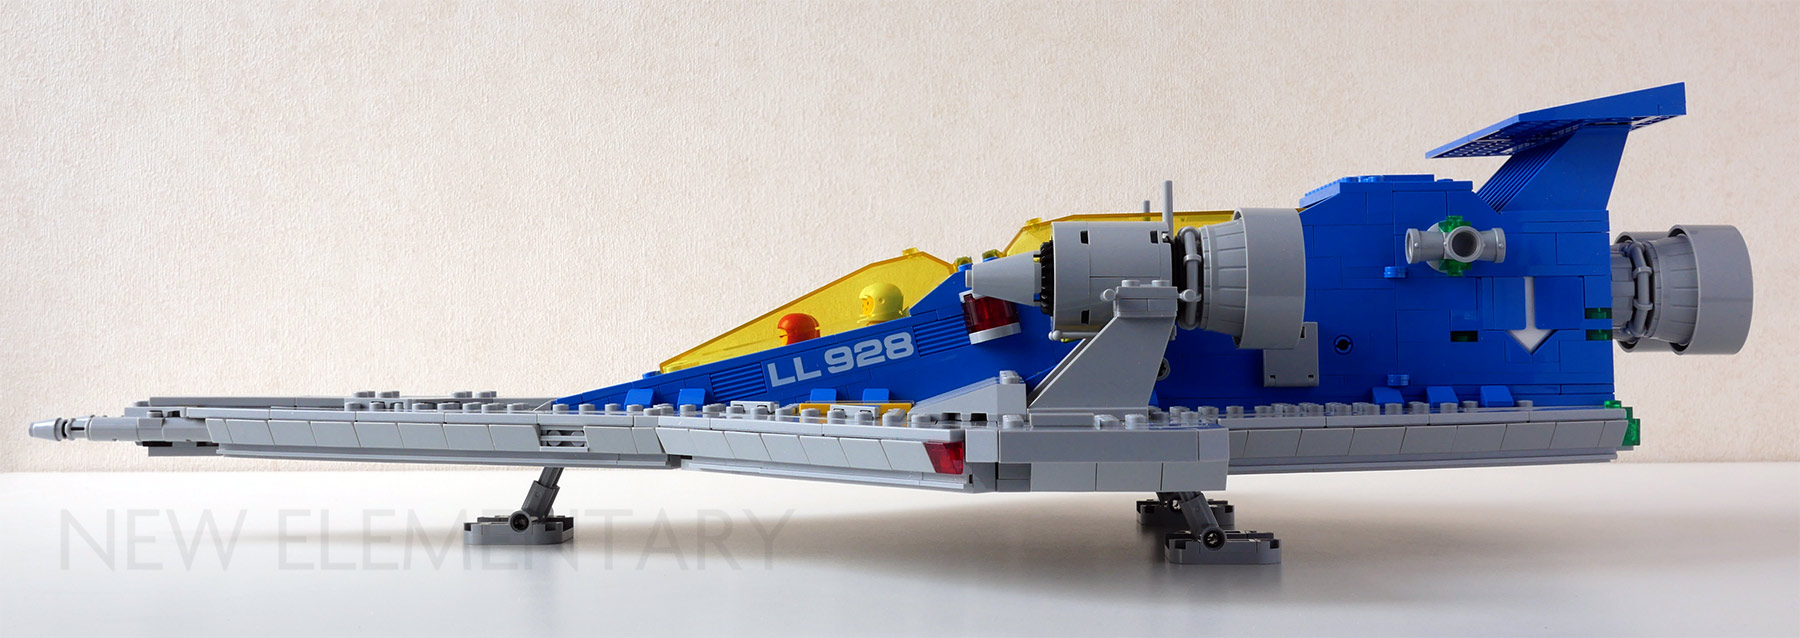 LEGO Enthusiast Completes Entire Space-Themed Collection